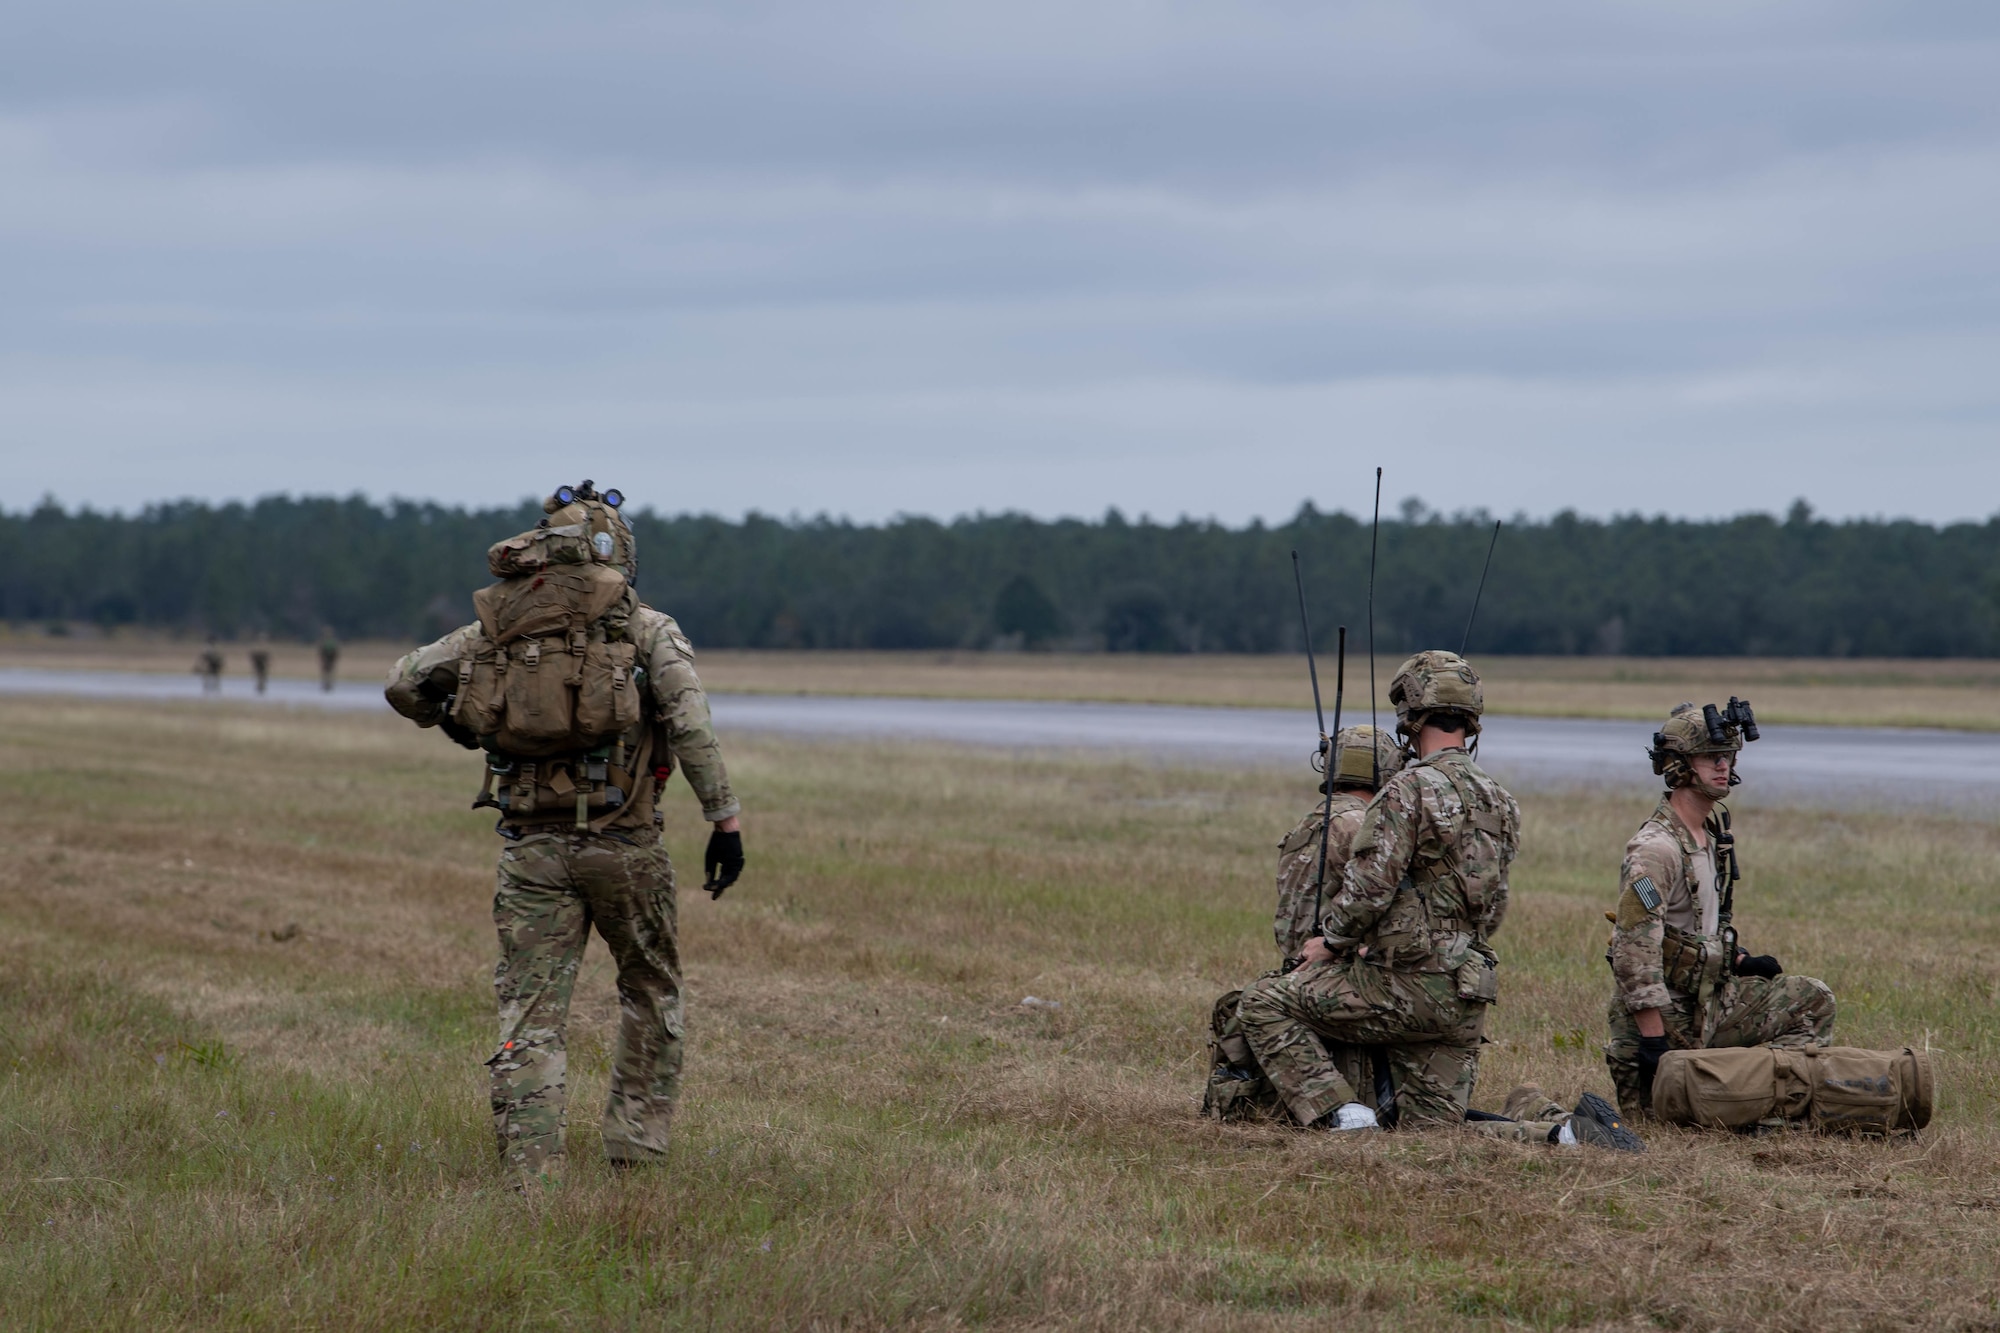 A trio of Special Tactics operators gather. One is walking in from the left, a radio operator is kneeling beside his gear in the middle of the picture, and another operator is sitting on the ground to the right.  Off in the far distance another trio of operators can be seen standing in a line of three across the road.